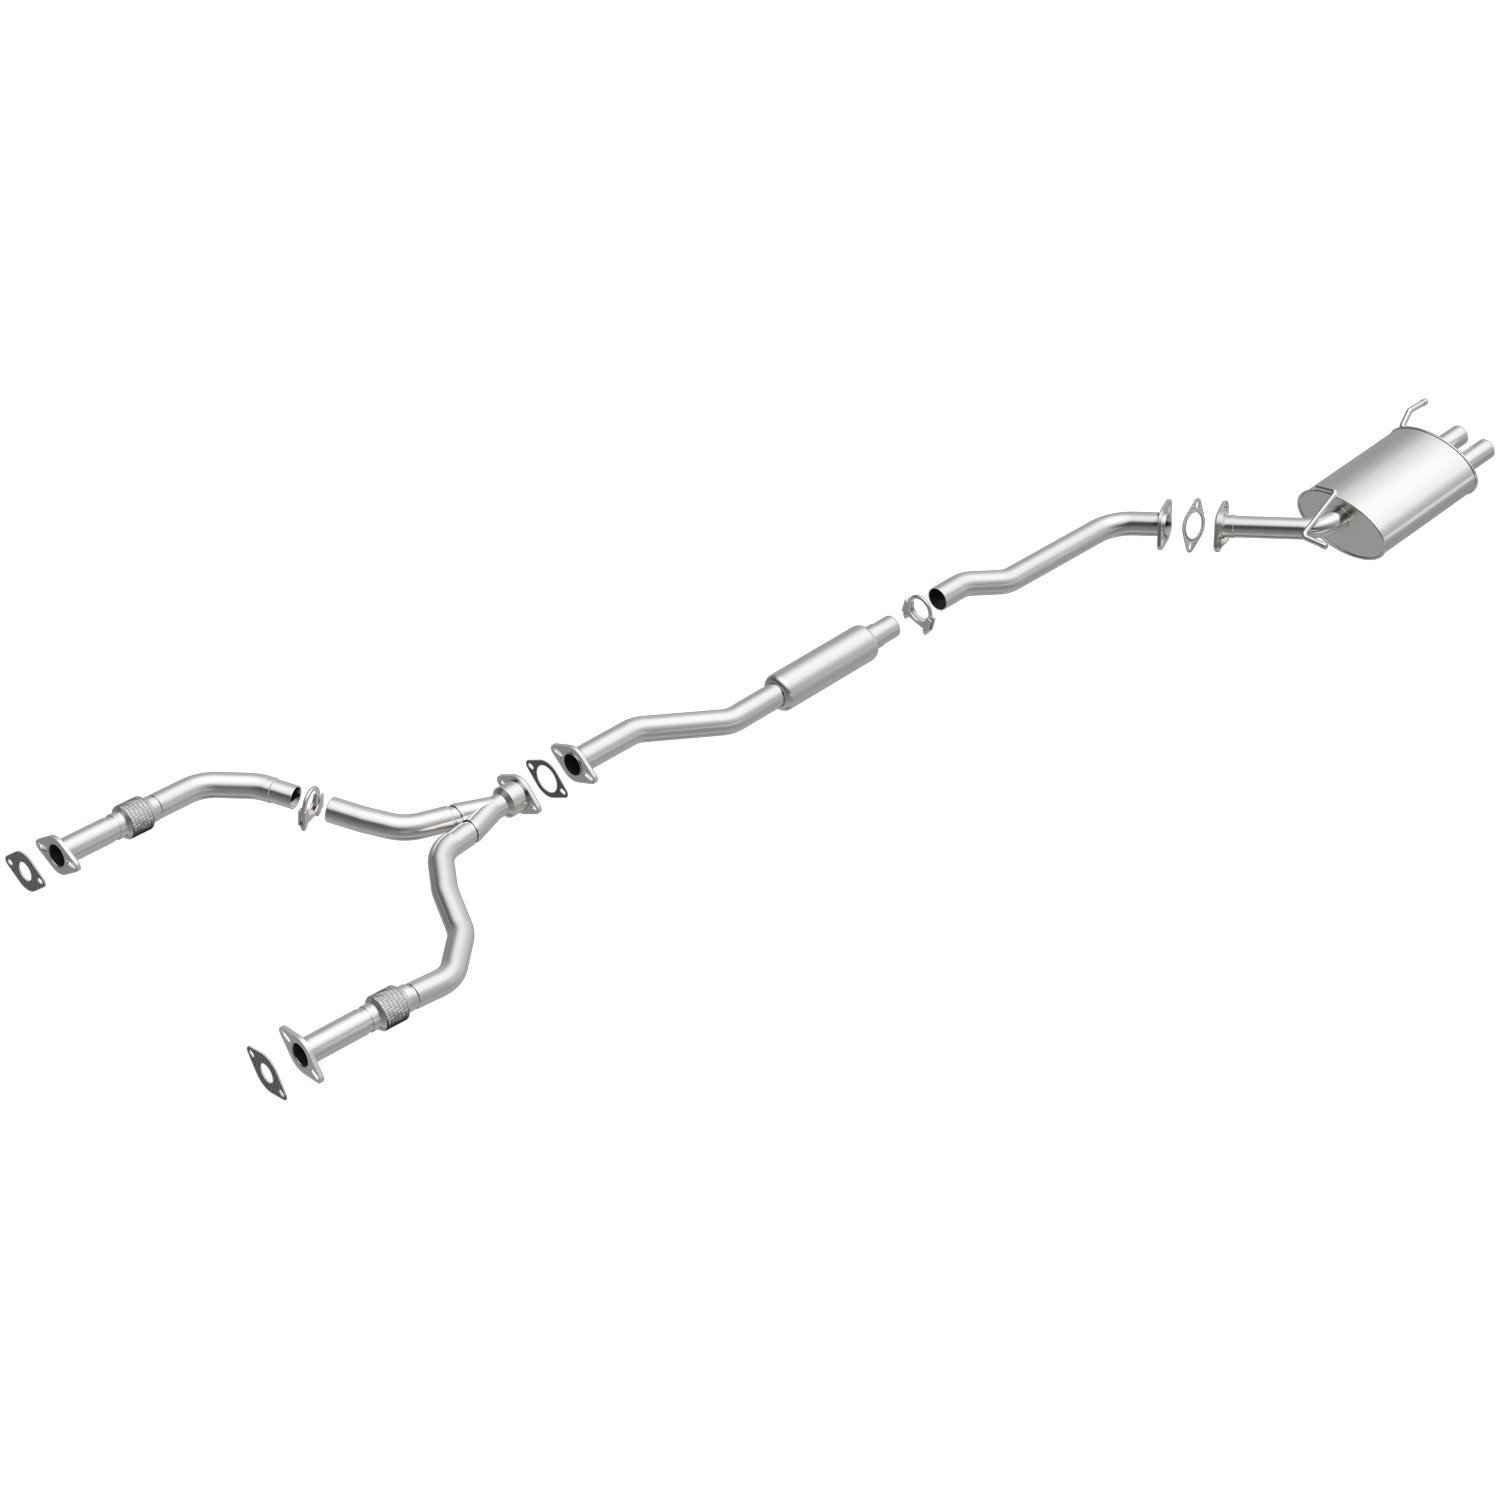 Direct-Fit Exhaust Kit, 2004-2006 Infiniti G35